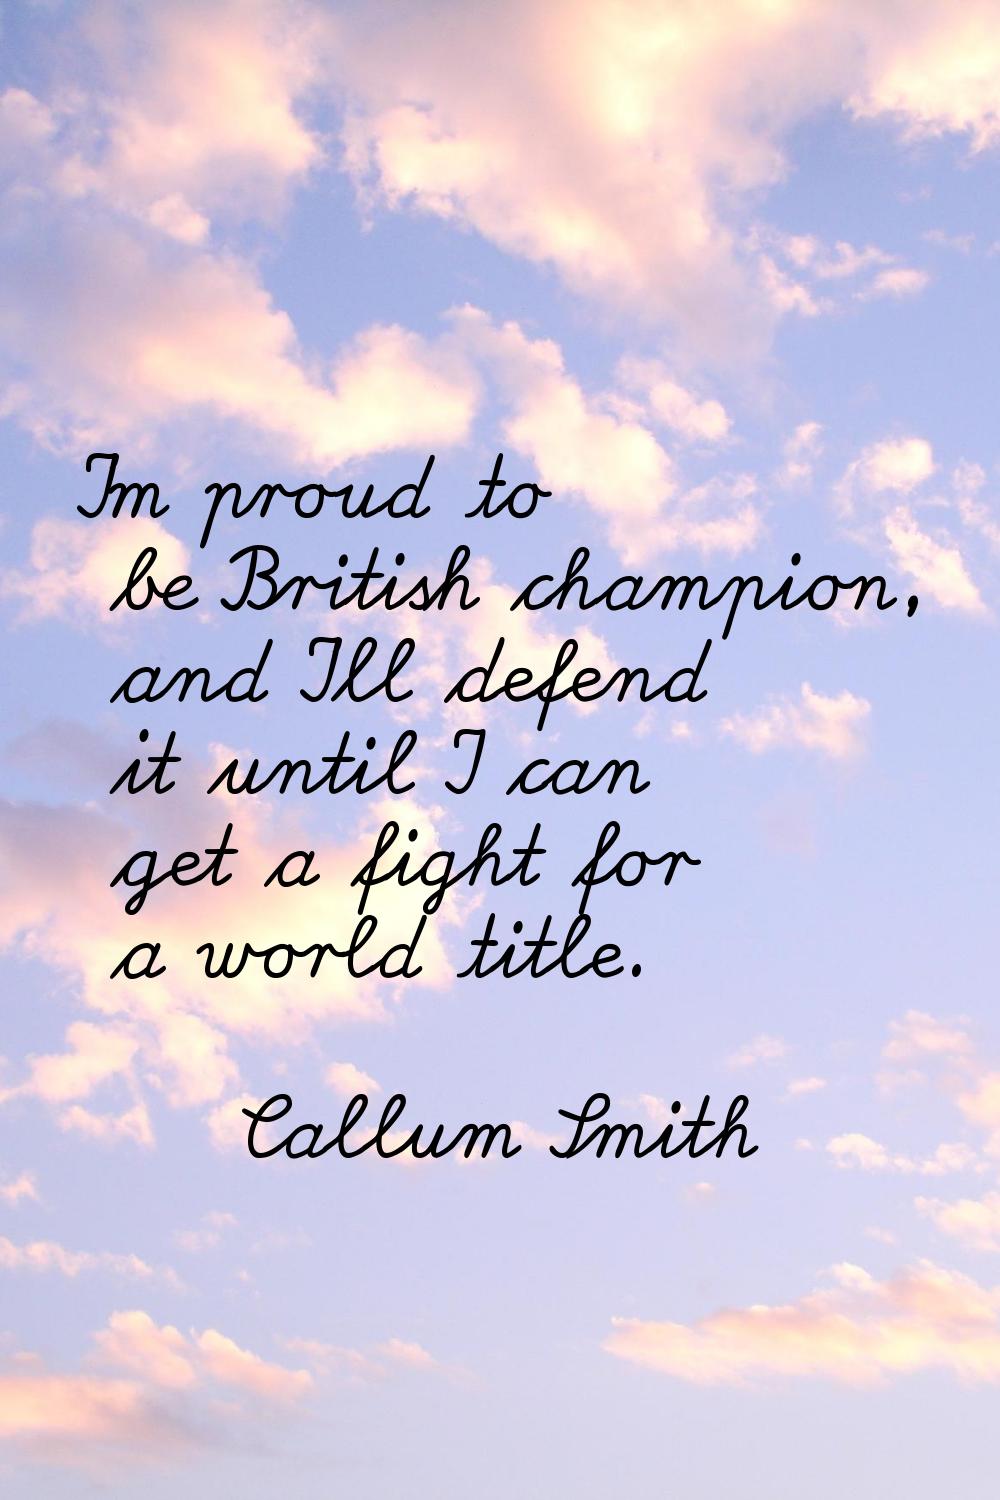 I'm proud to be British champion, and I'll defend it until I can get a fight for a world title.